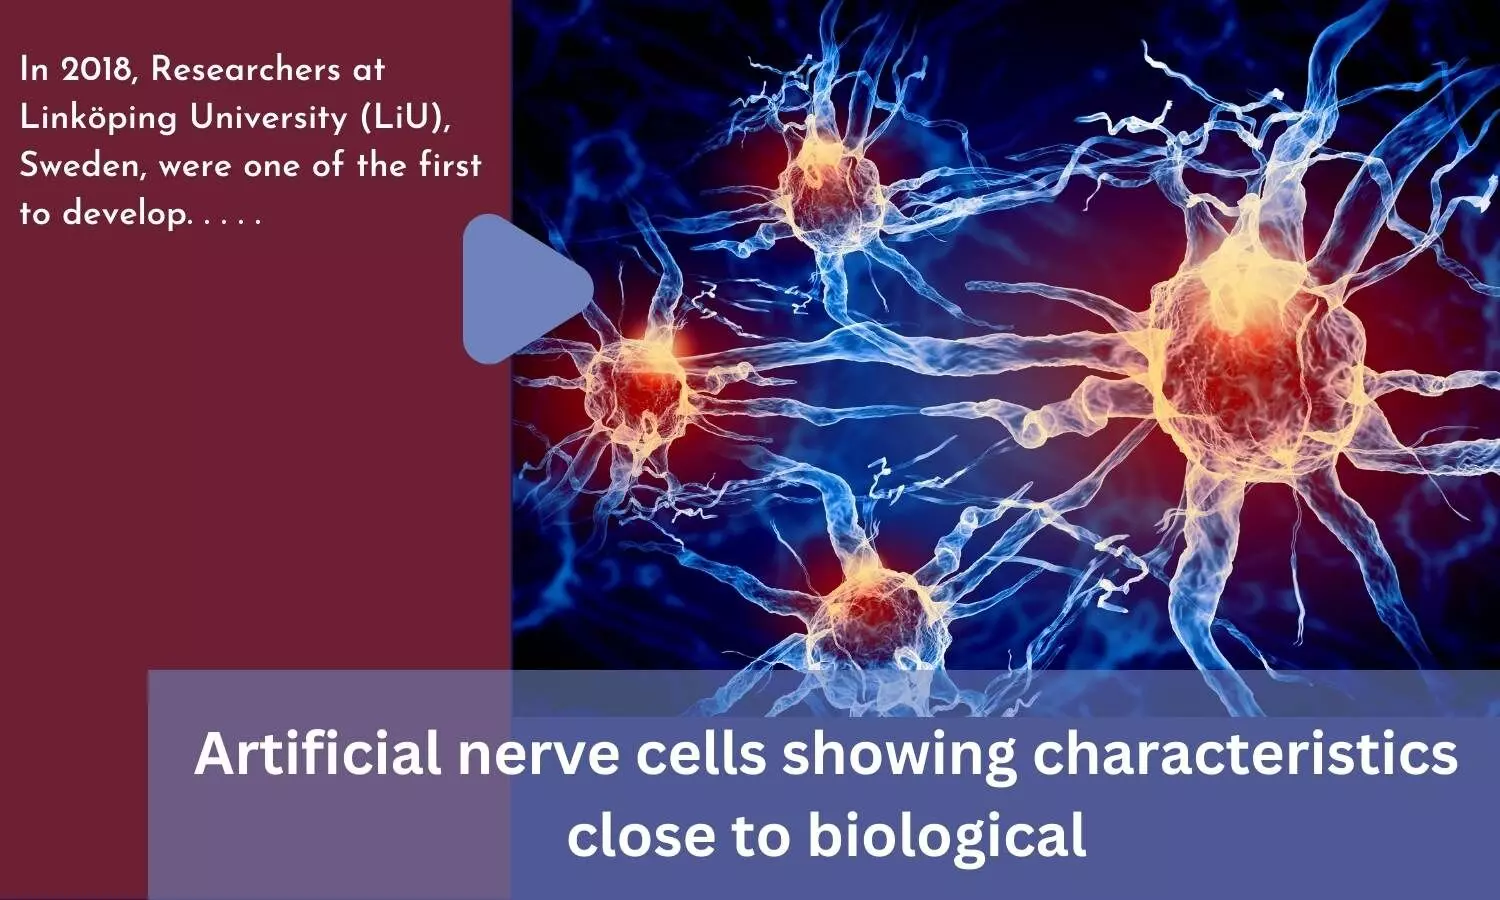 Artificial nerve cells showing characteristics close to biological